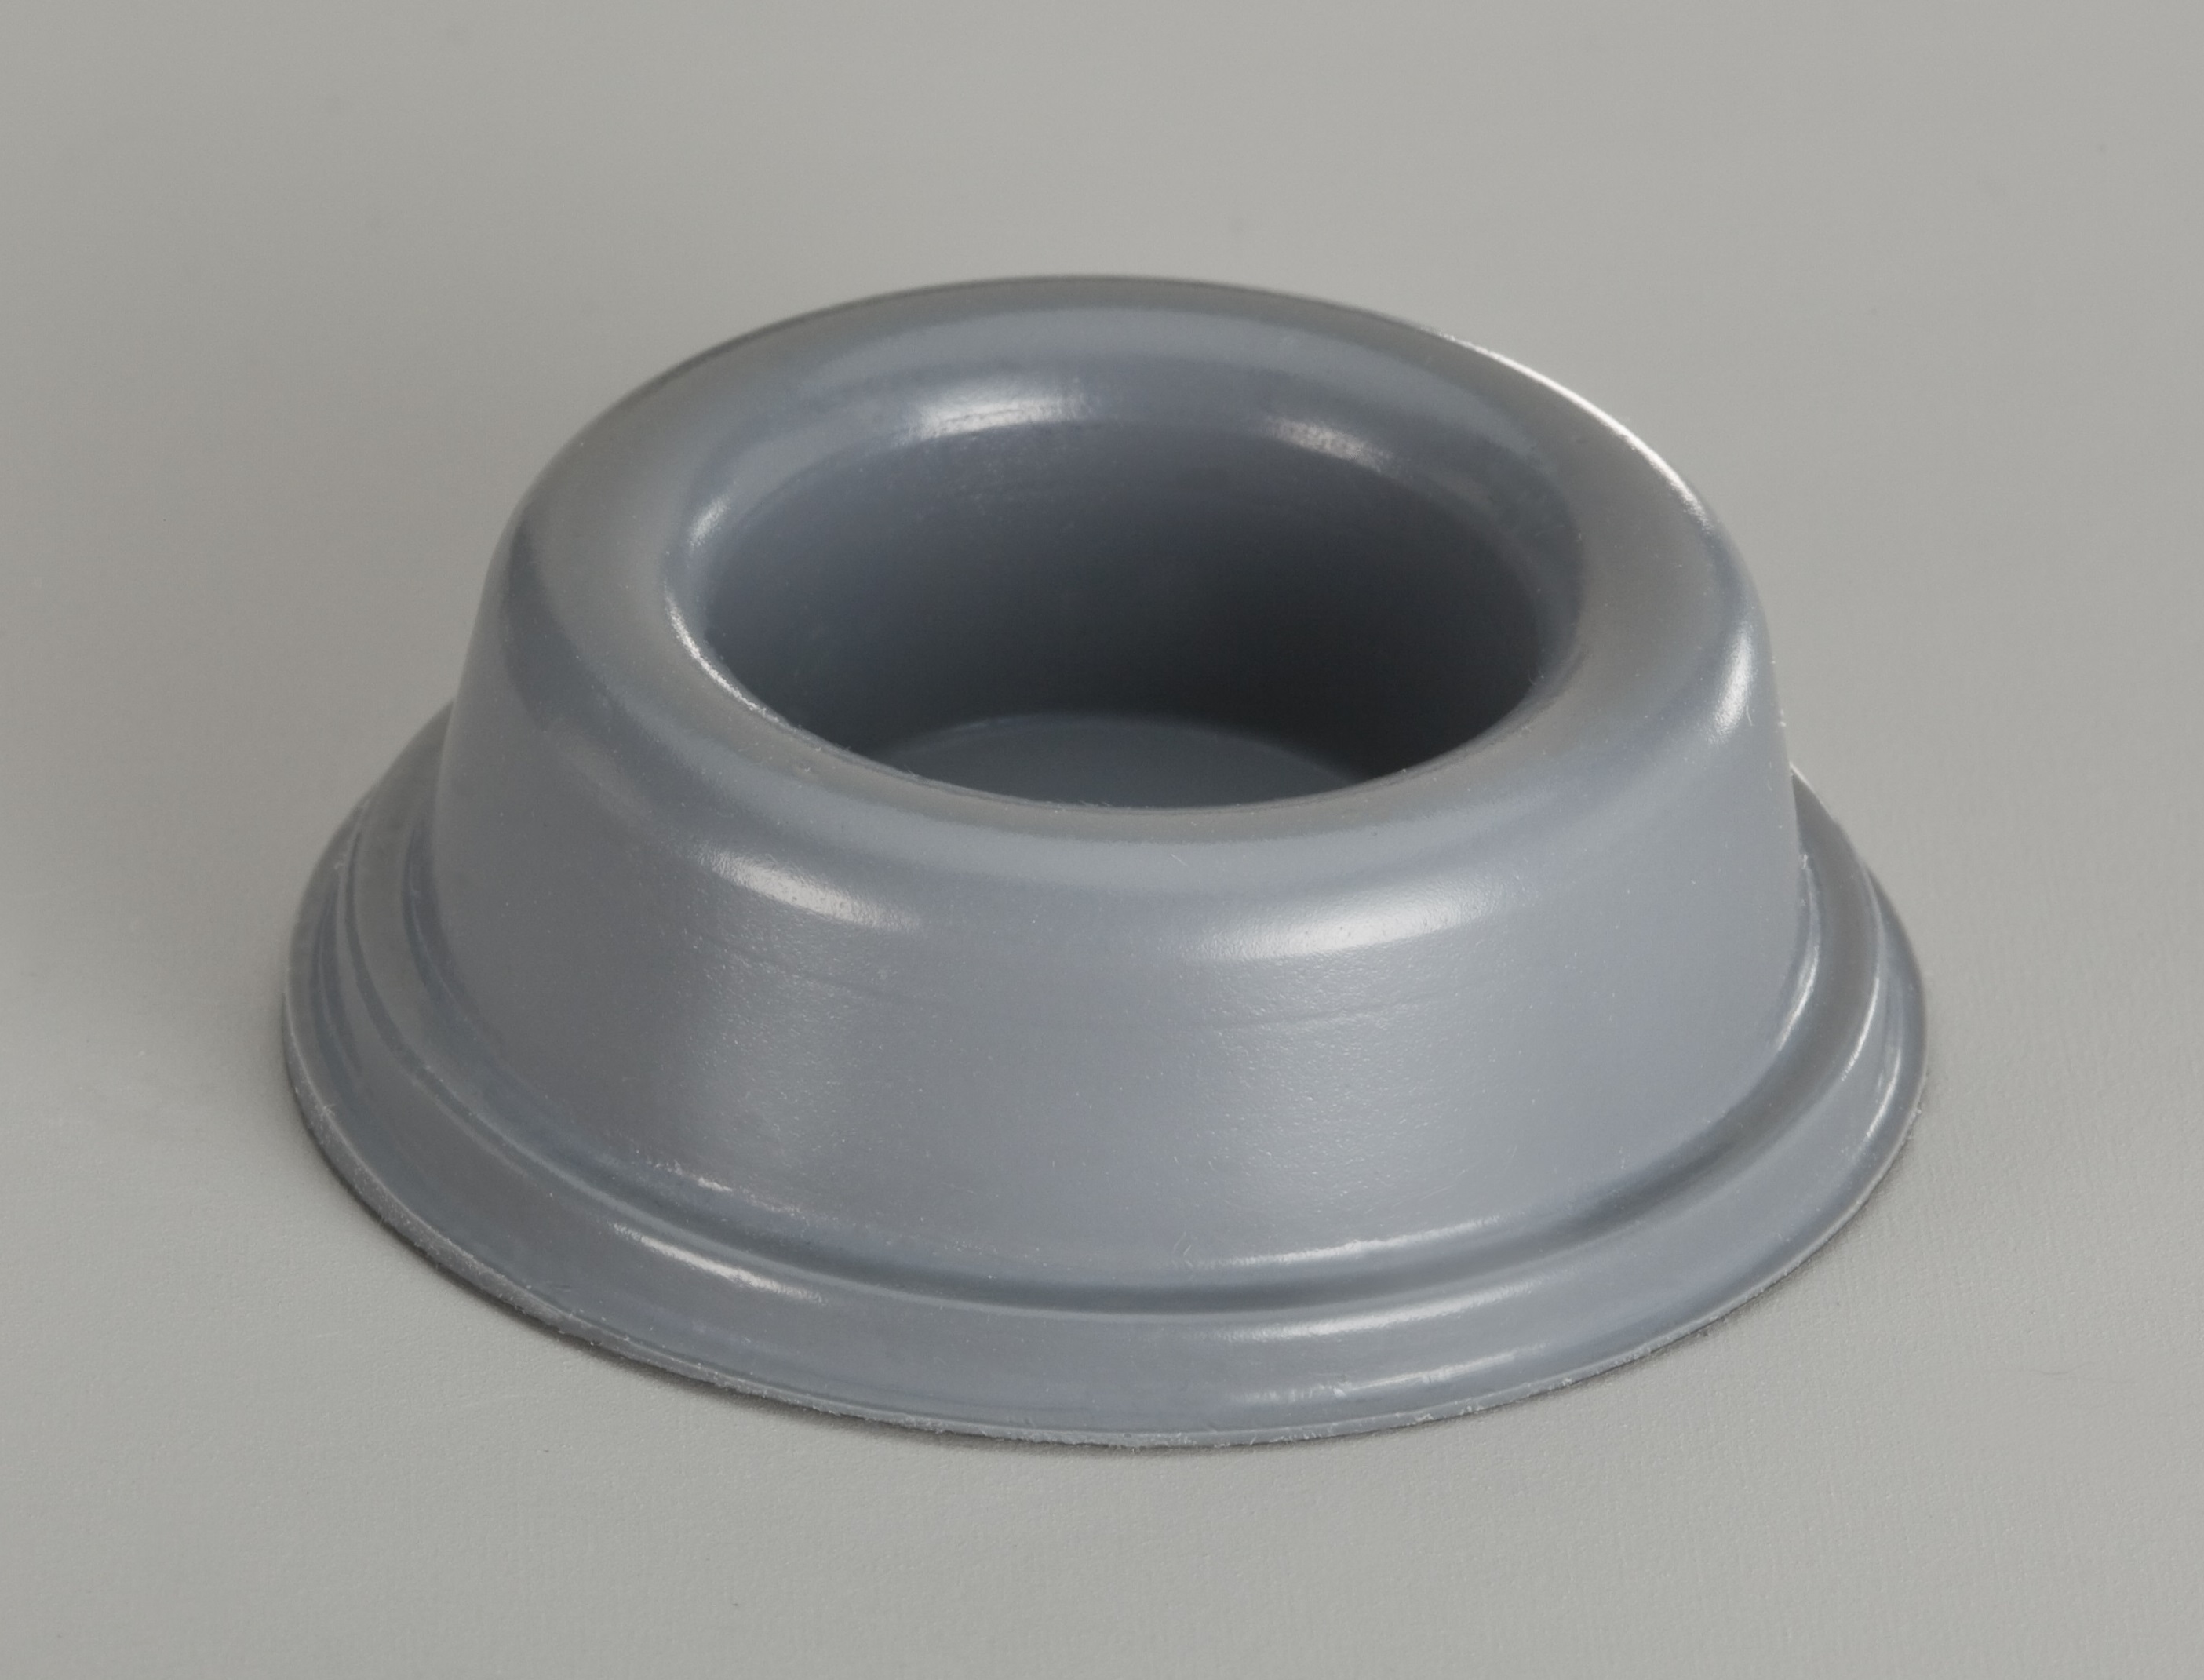 BS-30 GREY product image